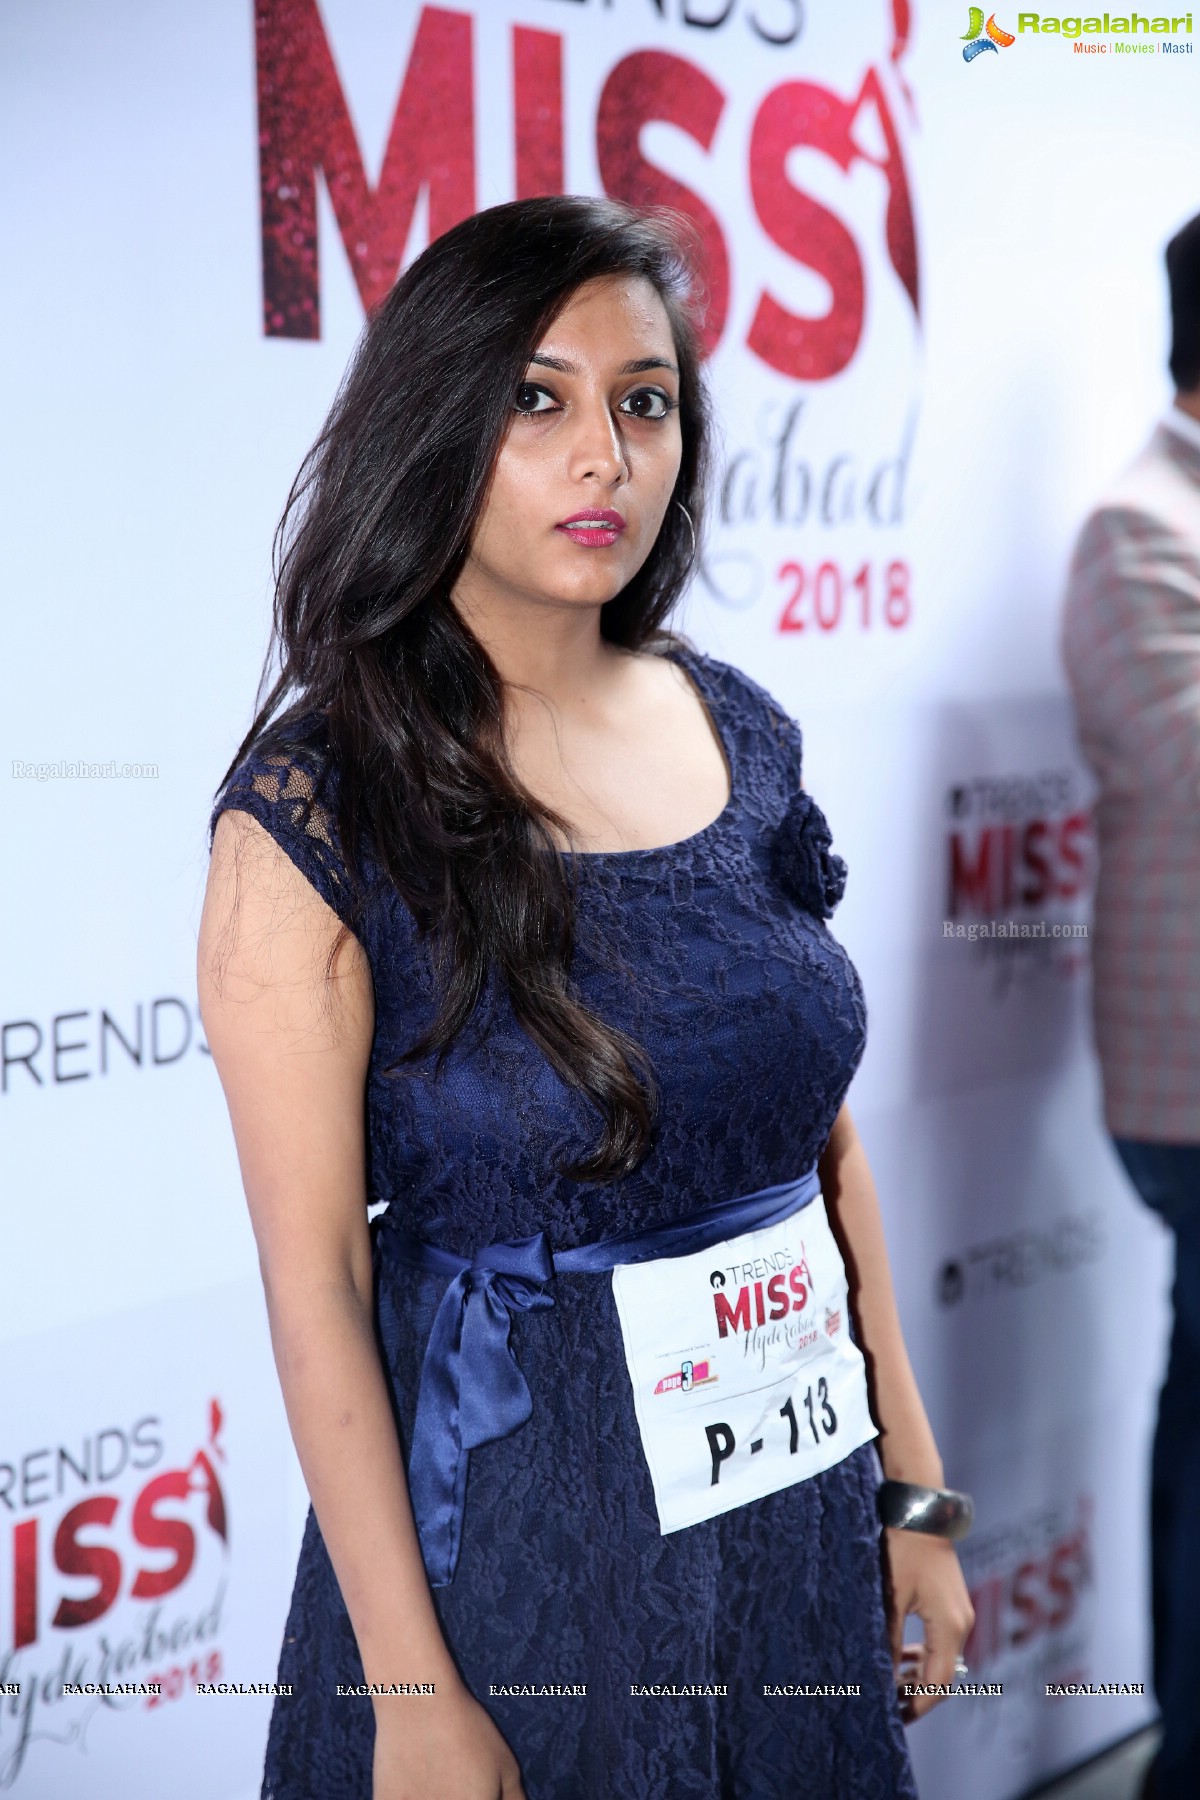 Trends Miss Hyderabad 2018 Auditions at Air Live, Jubilee Hills, Hyderabad